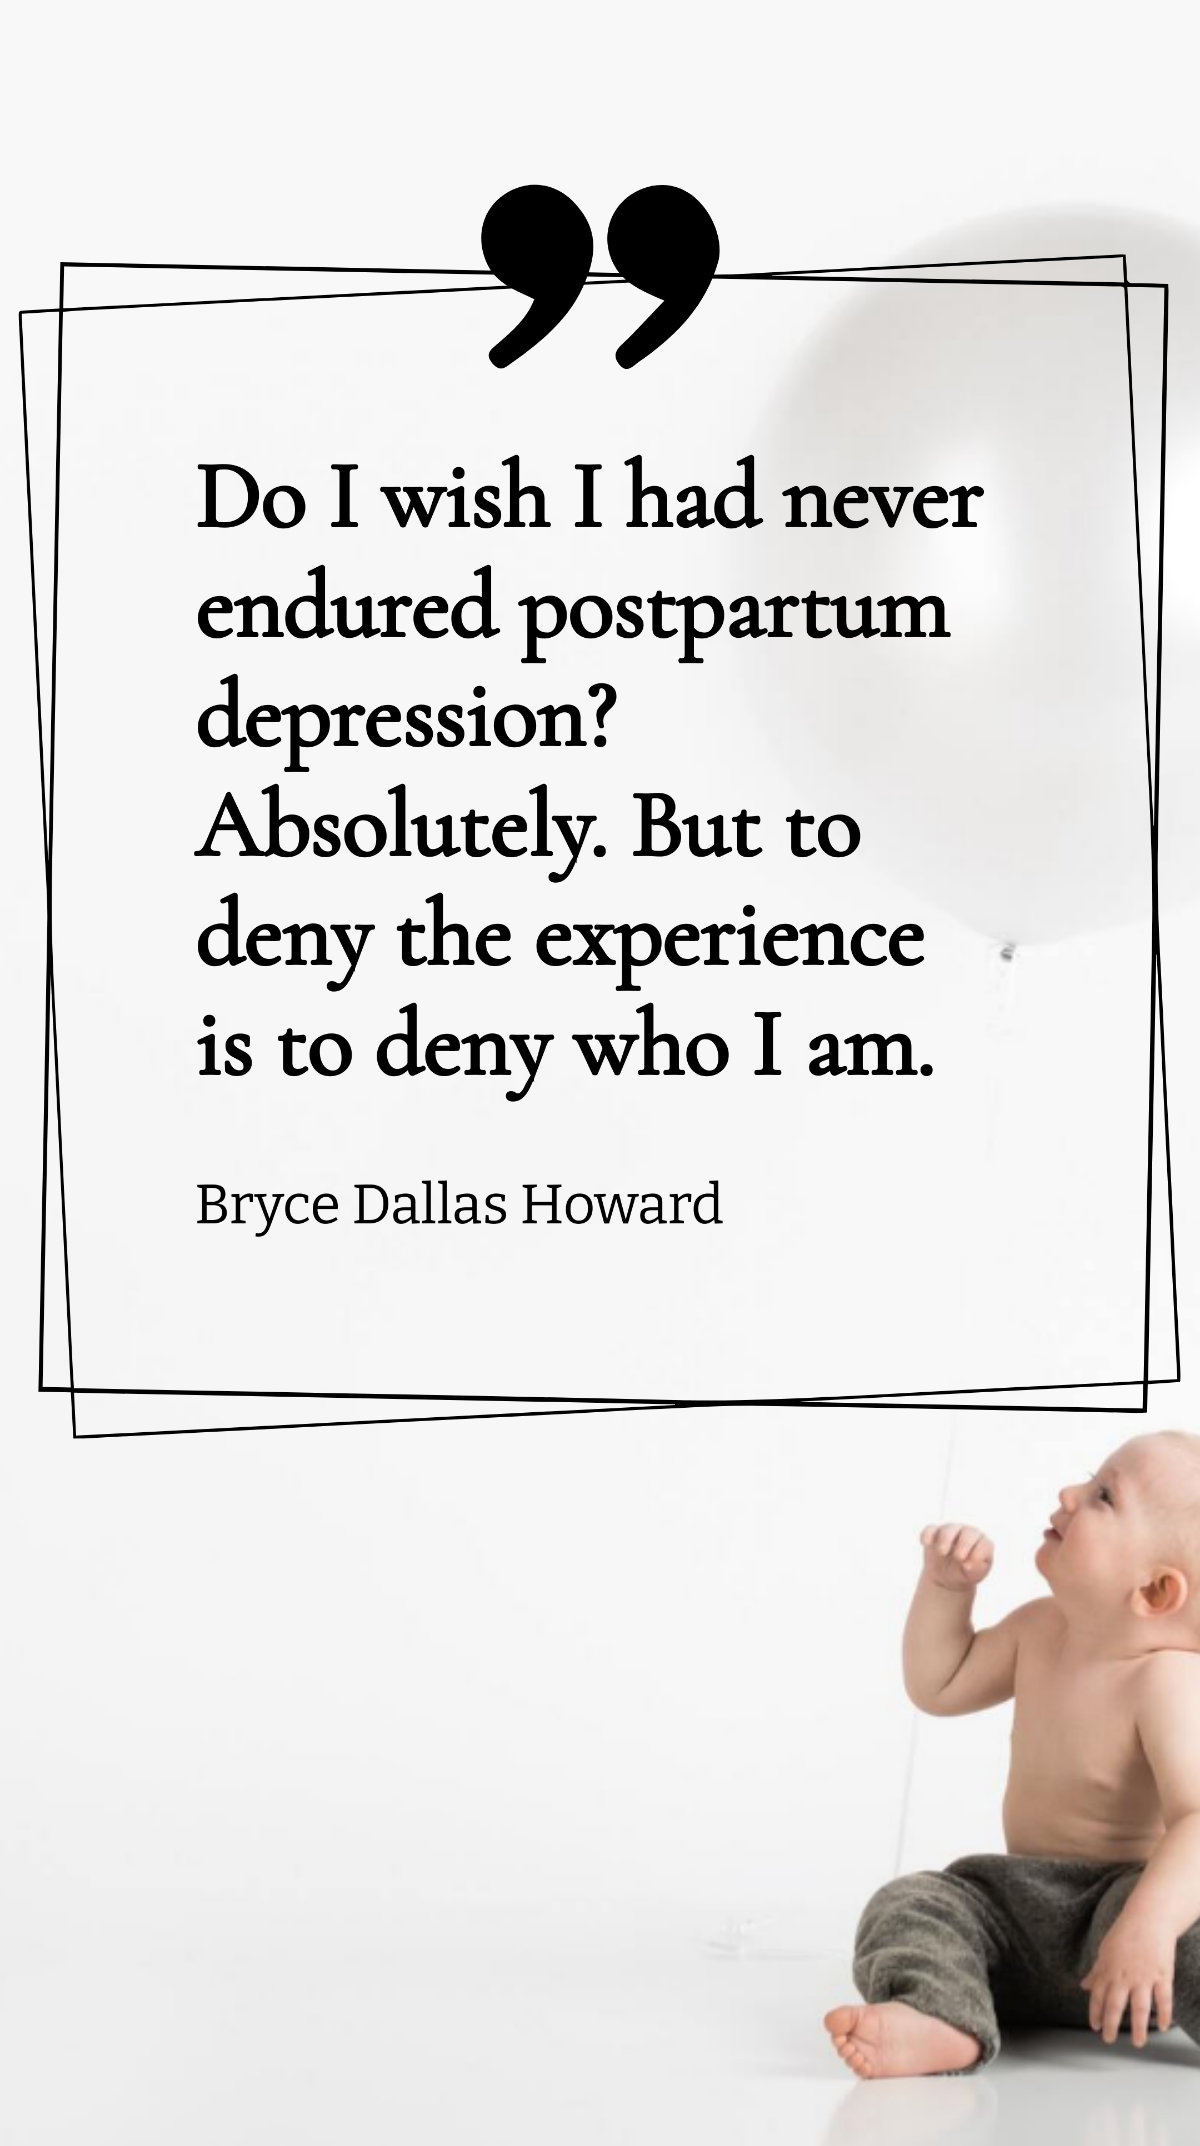 Bryce Dallas Howard - Do I wish I had never endured postpartum depression? Absolutely. But to deny the experience is to deny who I am. Template